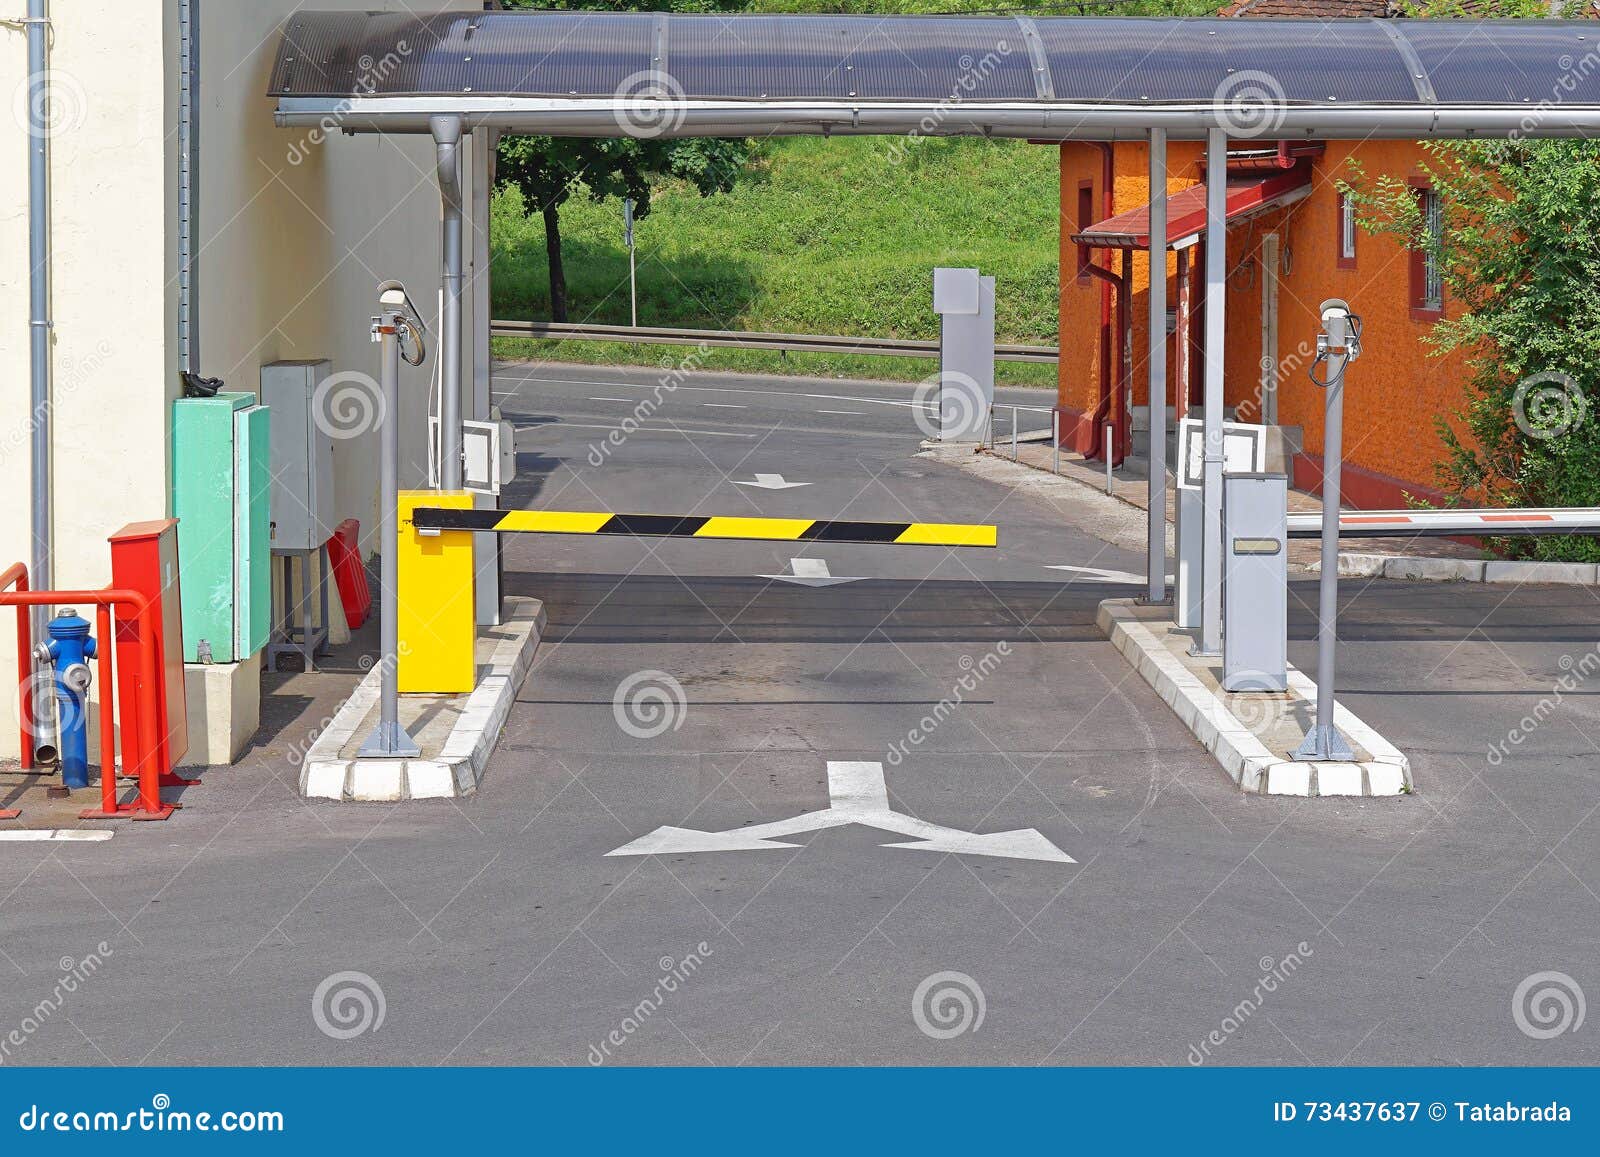 Parking barrier stock image. Image of barrier, structure - 73437637